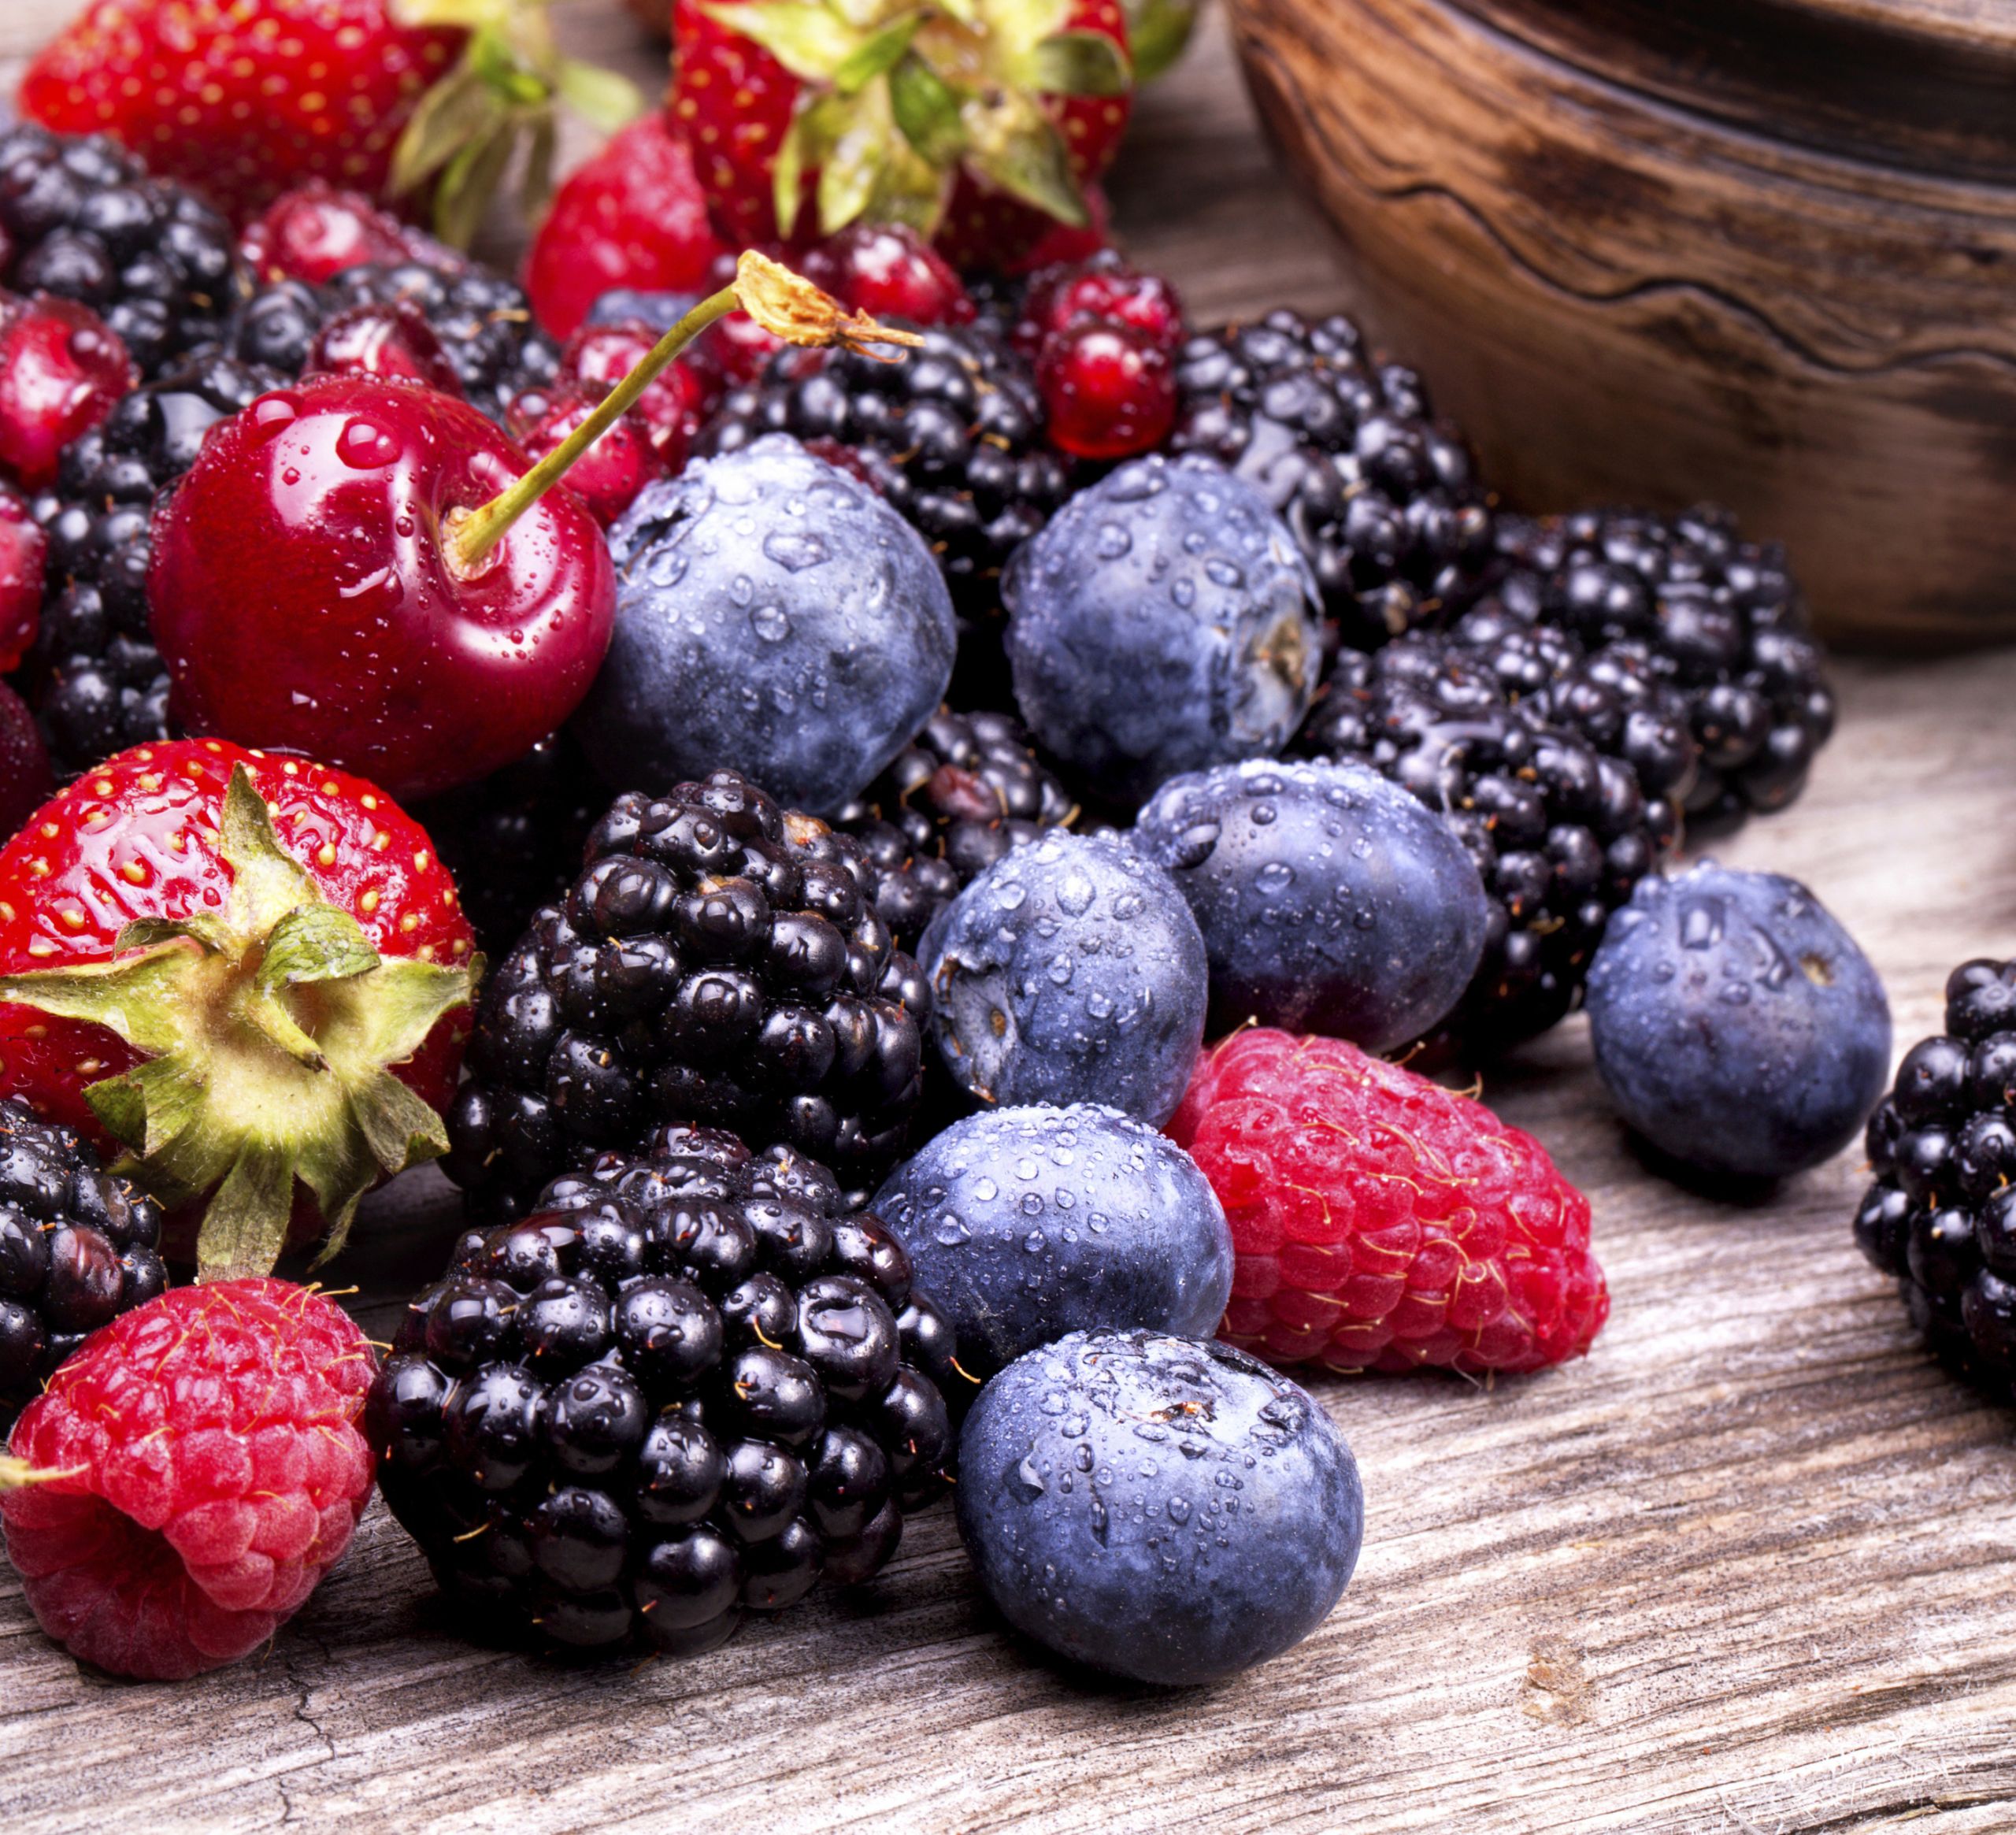 Paleo Diet Fruits
 The paleo superfruit you should be eating Easy Health